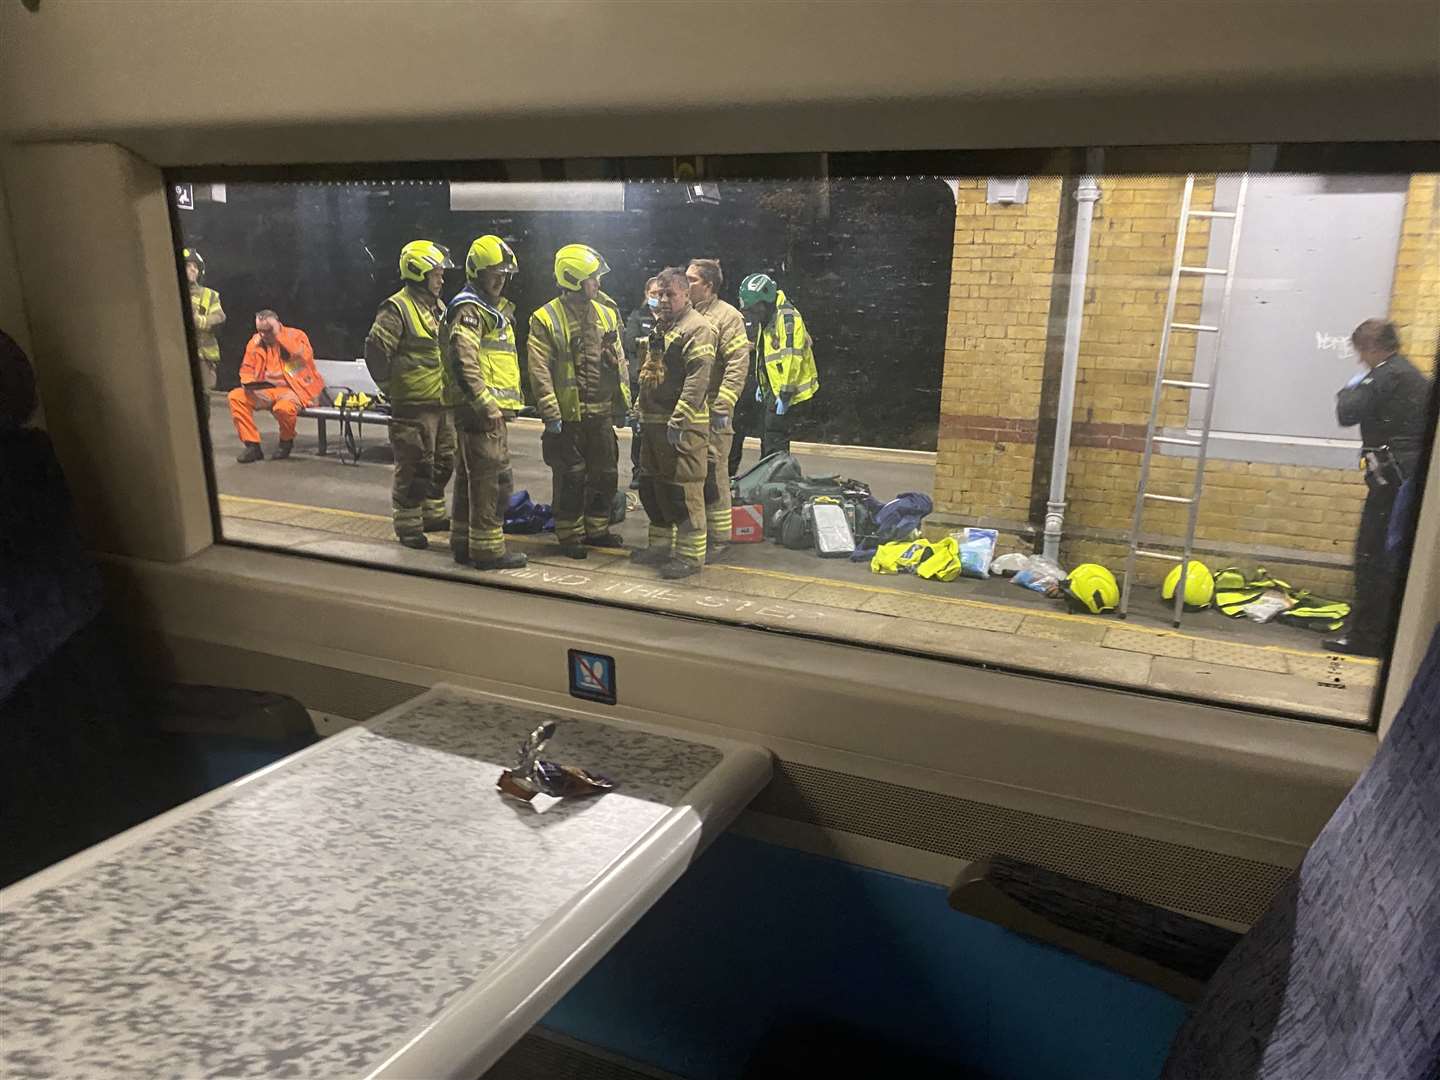 Emergency services were called to Bickley station this evening